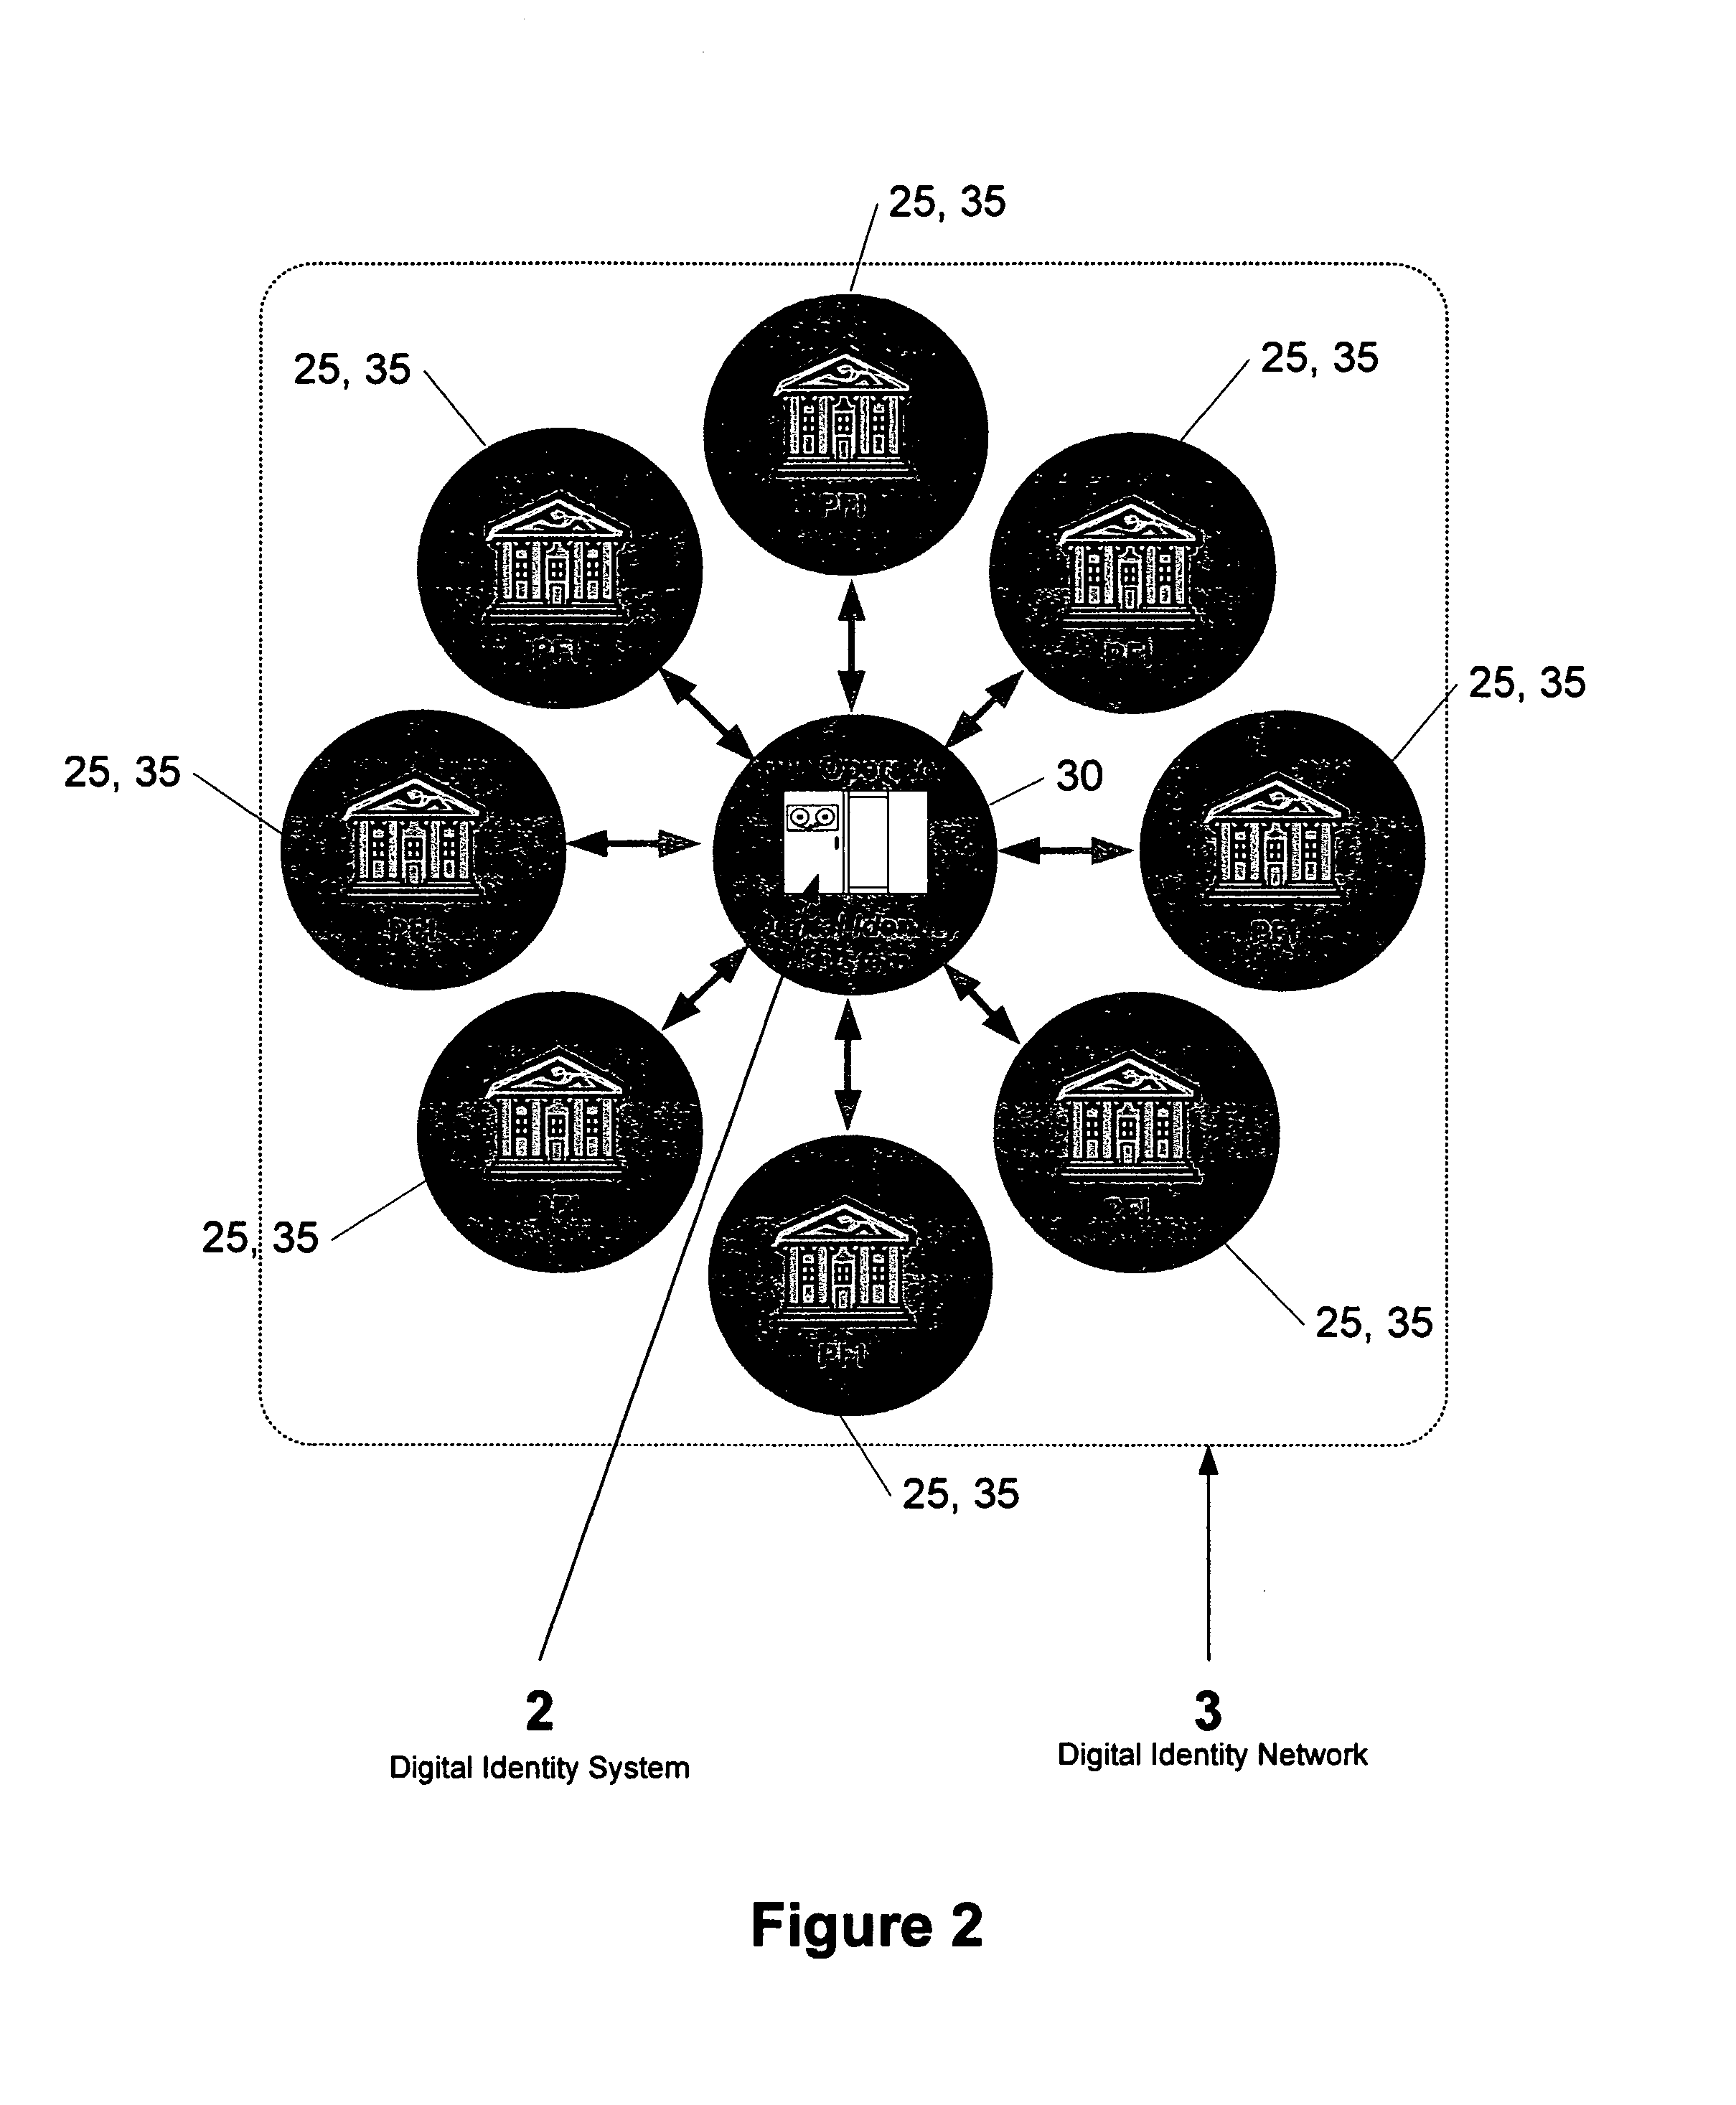 Direct authentication and authorization system and method for trusted network of financial institutions